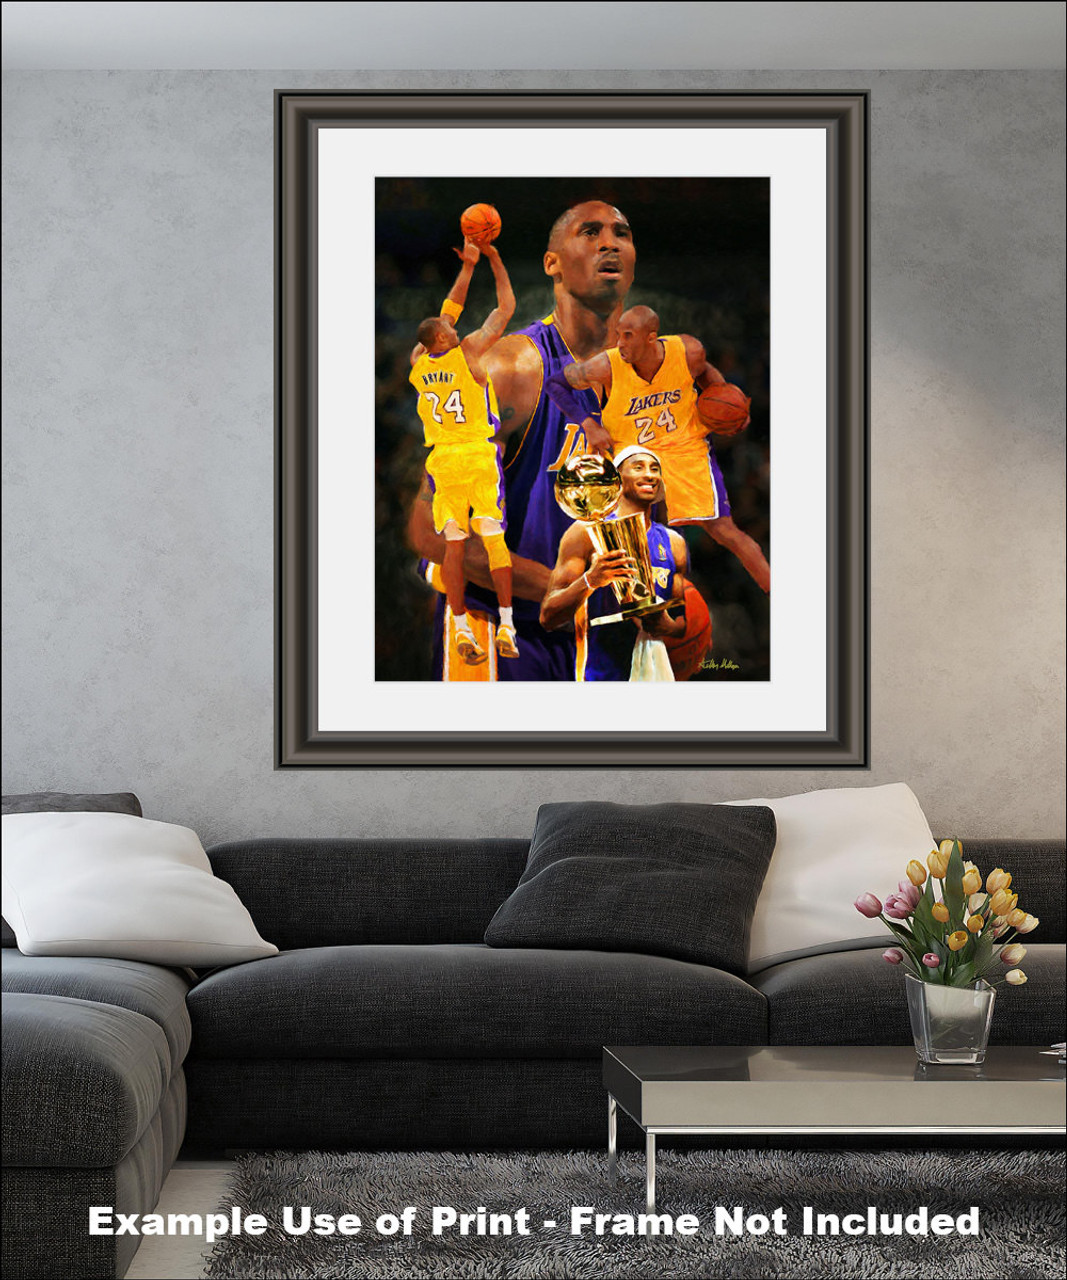 Kobe Bryant 8 x 10 Photograph with Team Patch and Statistics in a 12   18 Deluxe Photograph Frame